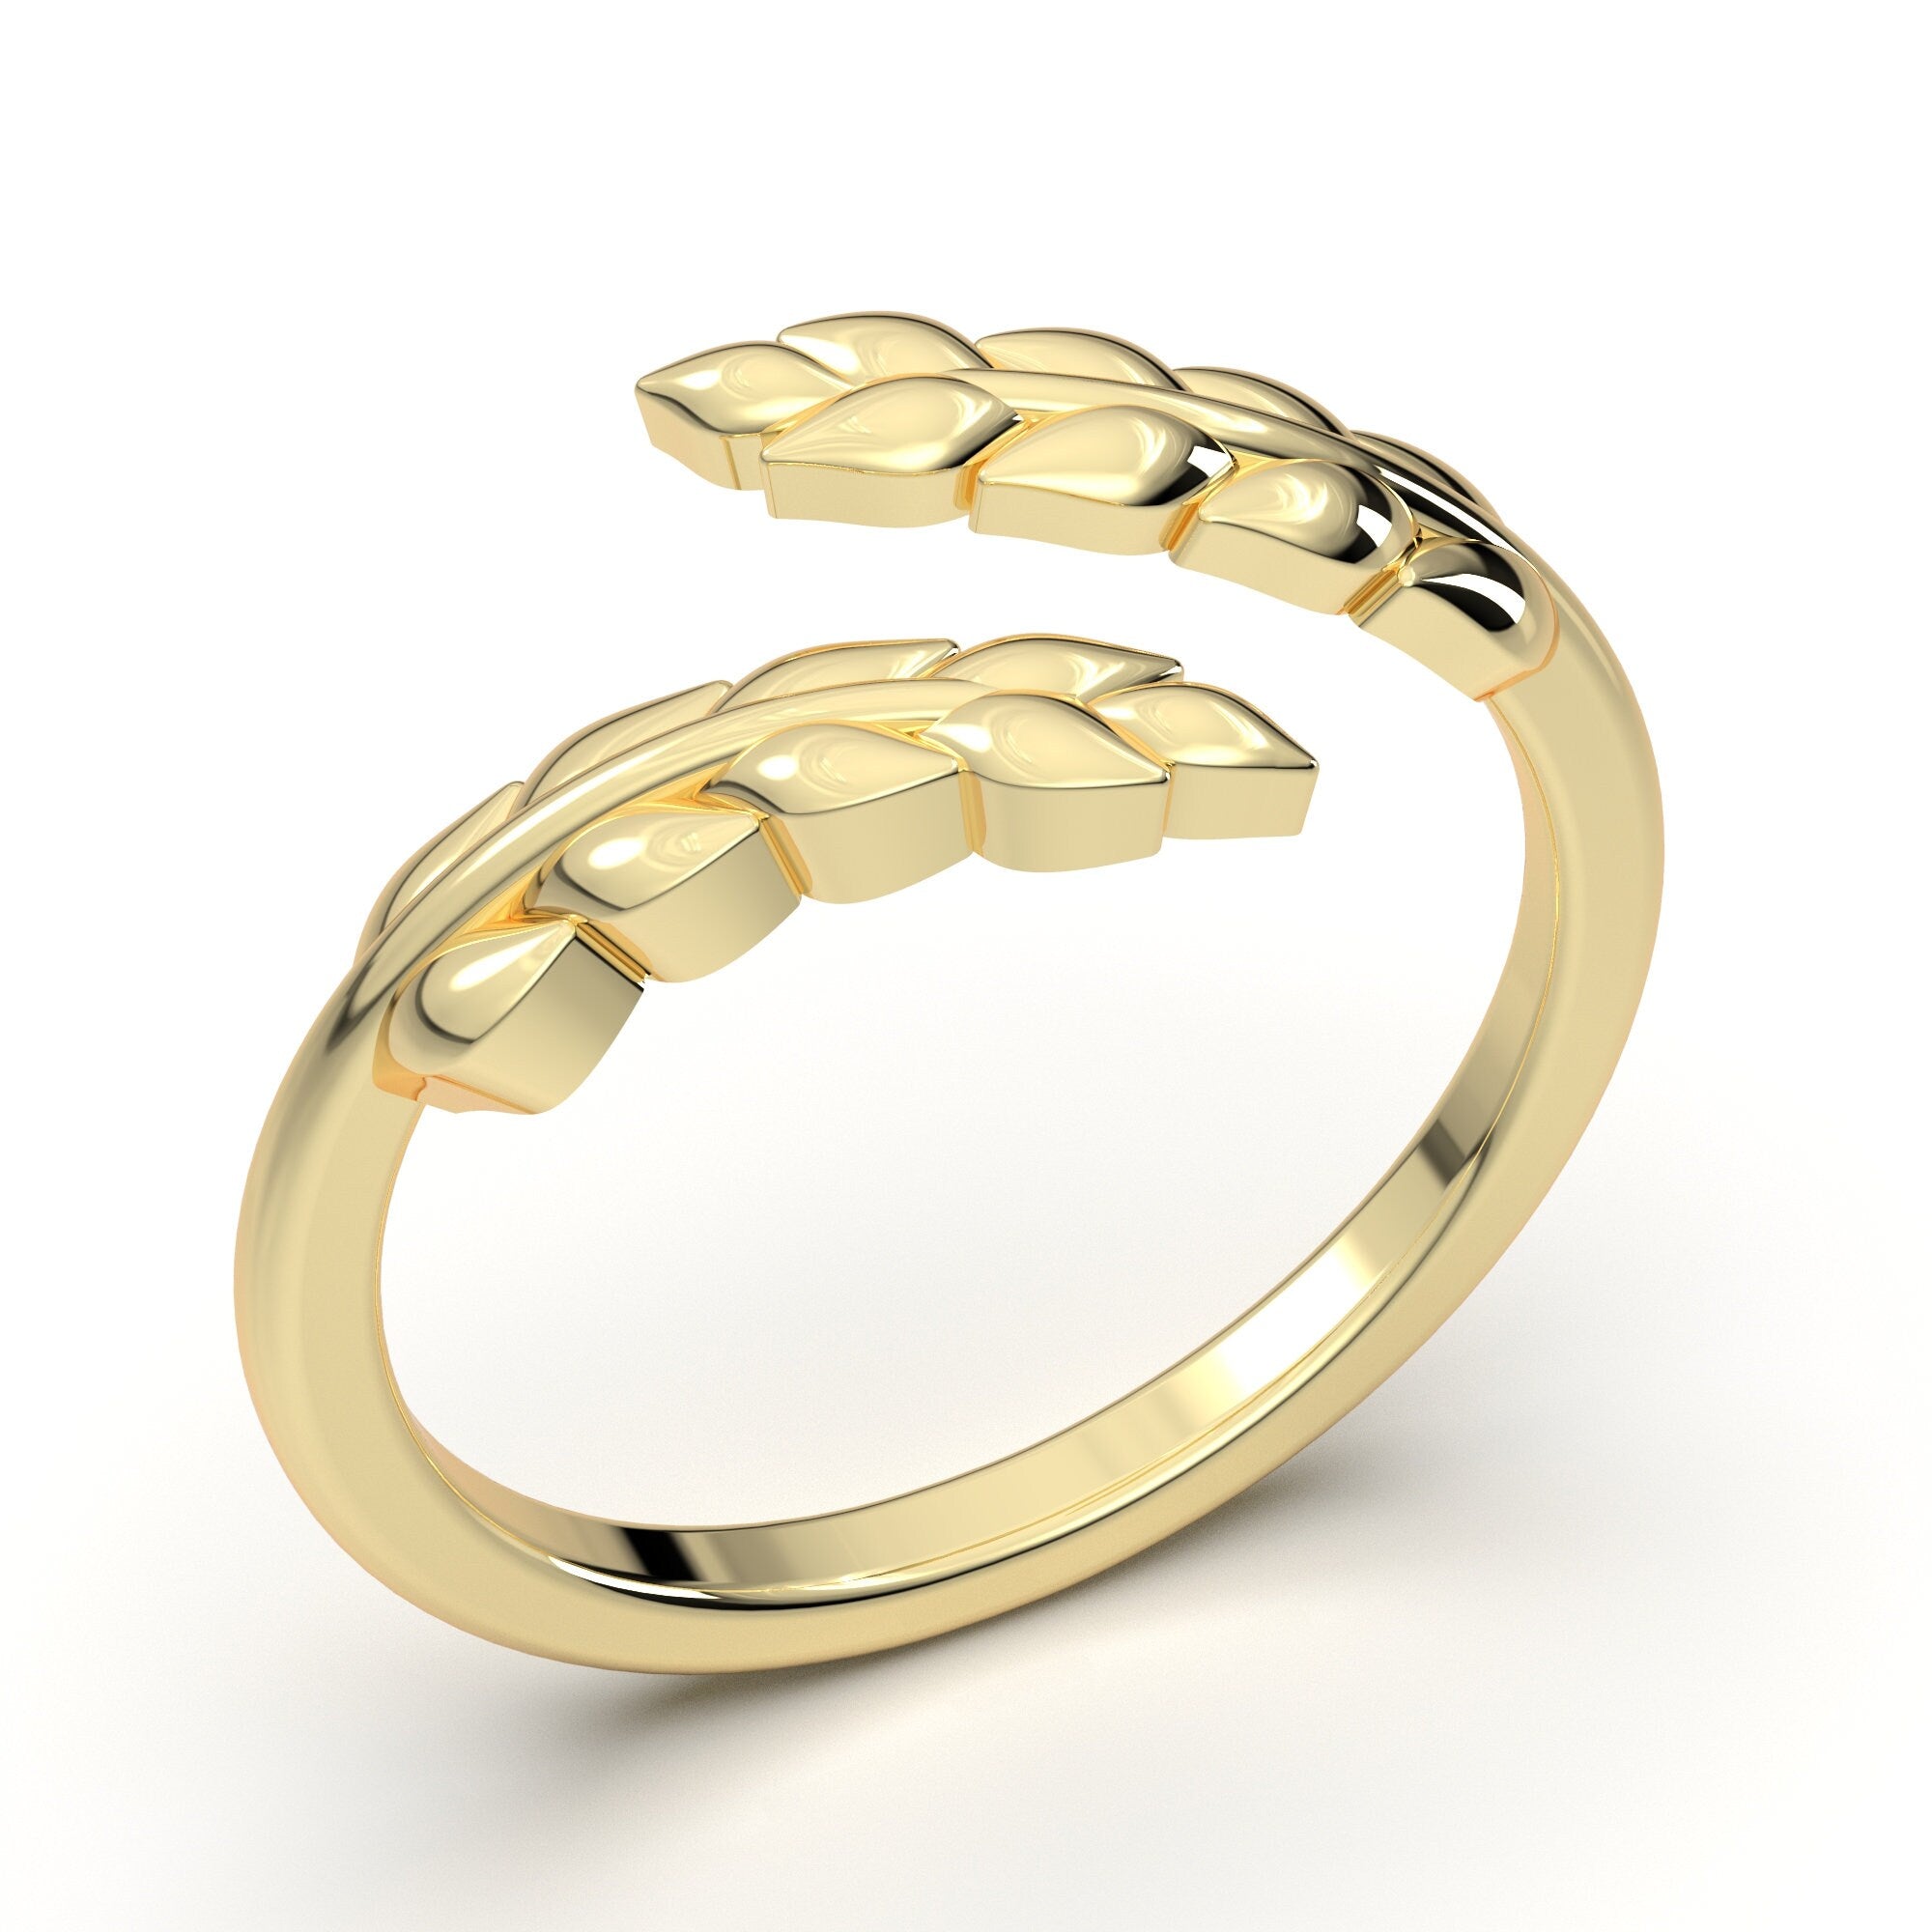 Nordt 14K Yellow Gold 4mm Channel Ring - RioGrande